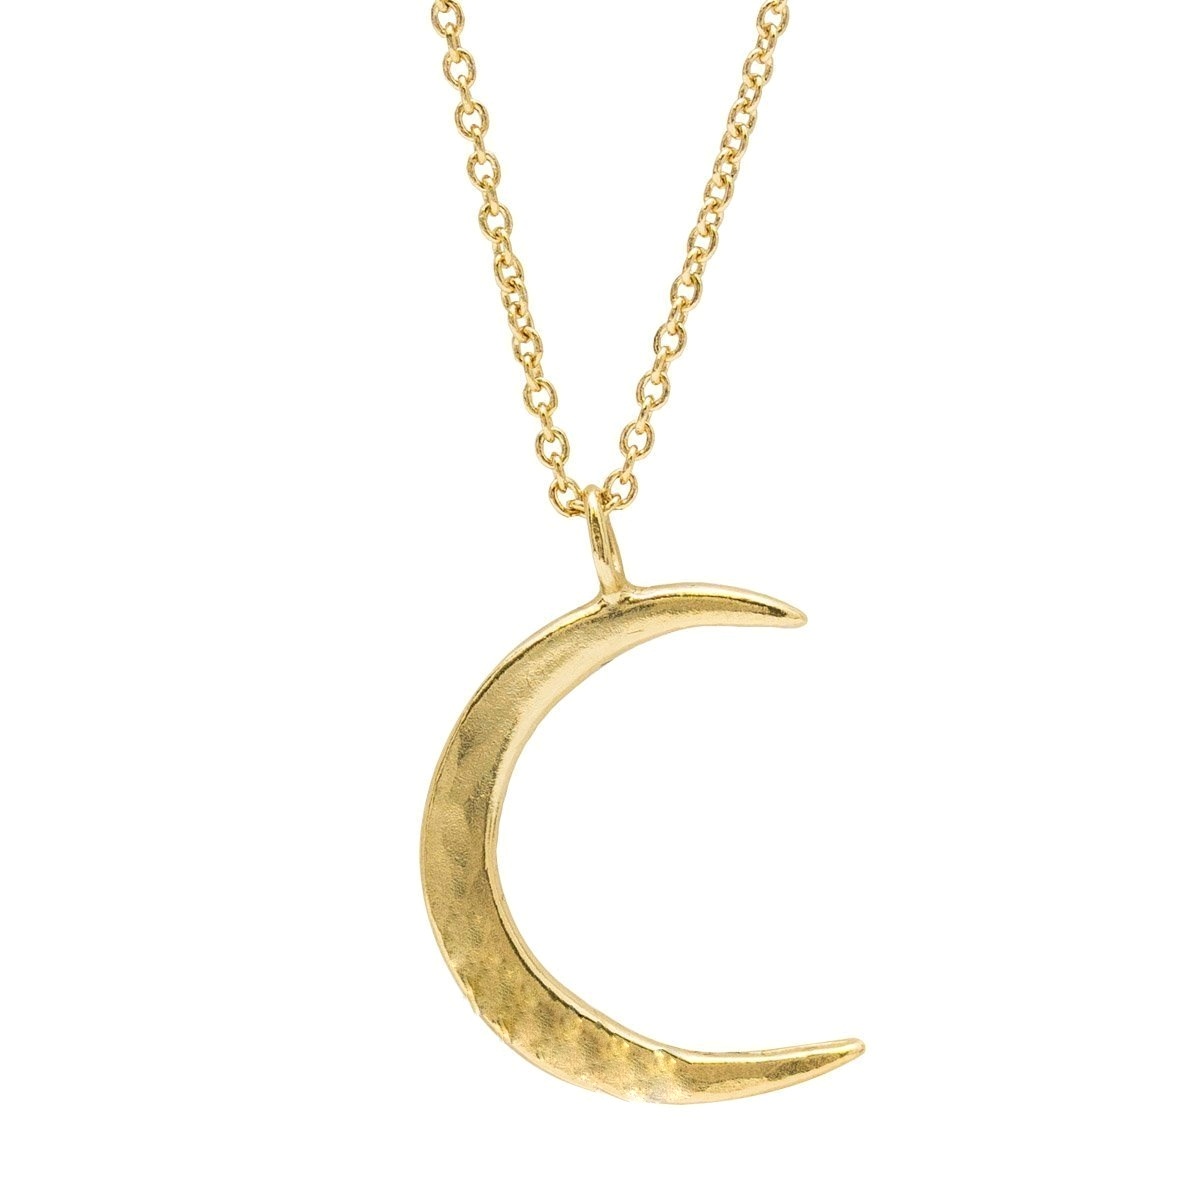 Posh Totty Designs Crescent Moon Necklace 